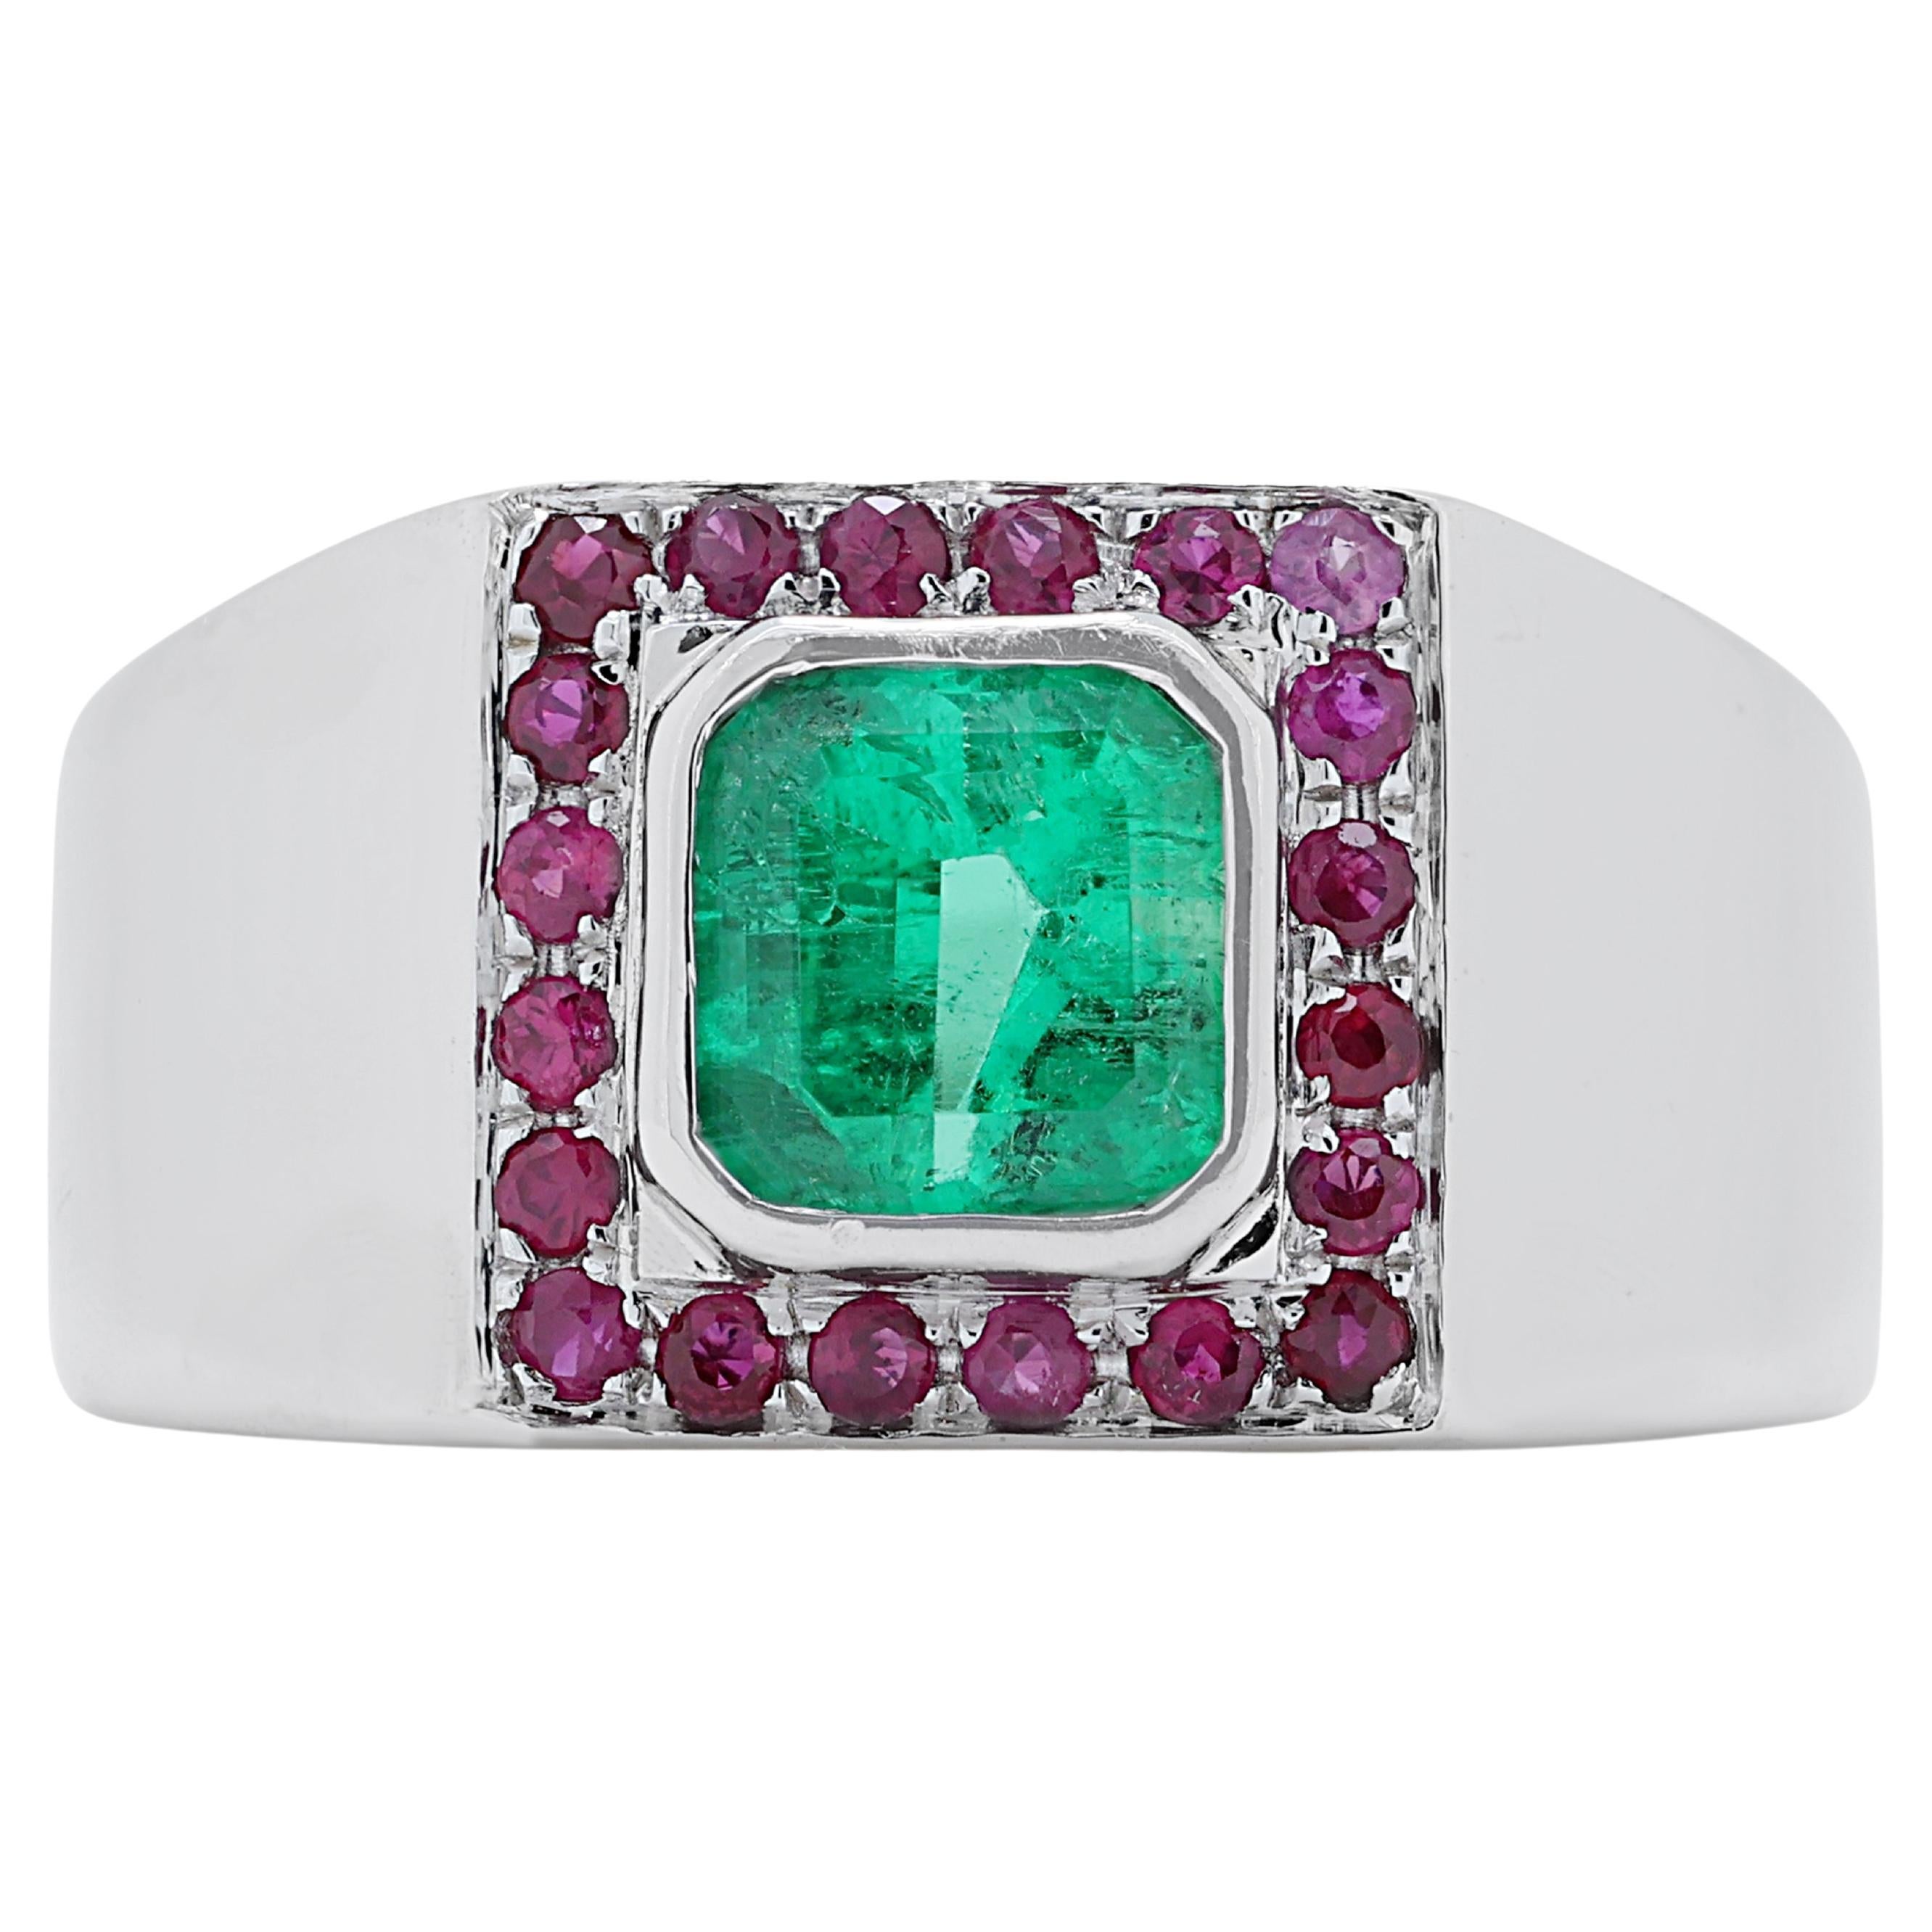 Stylish 1.05ct Emerald Dome Ring in 18K White Gold with Rubies For Sale